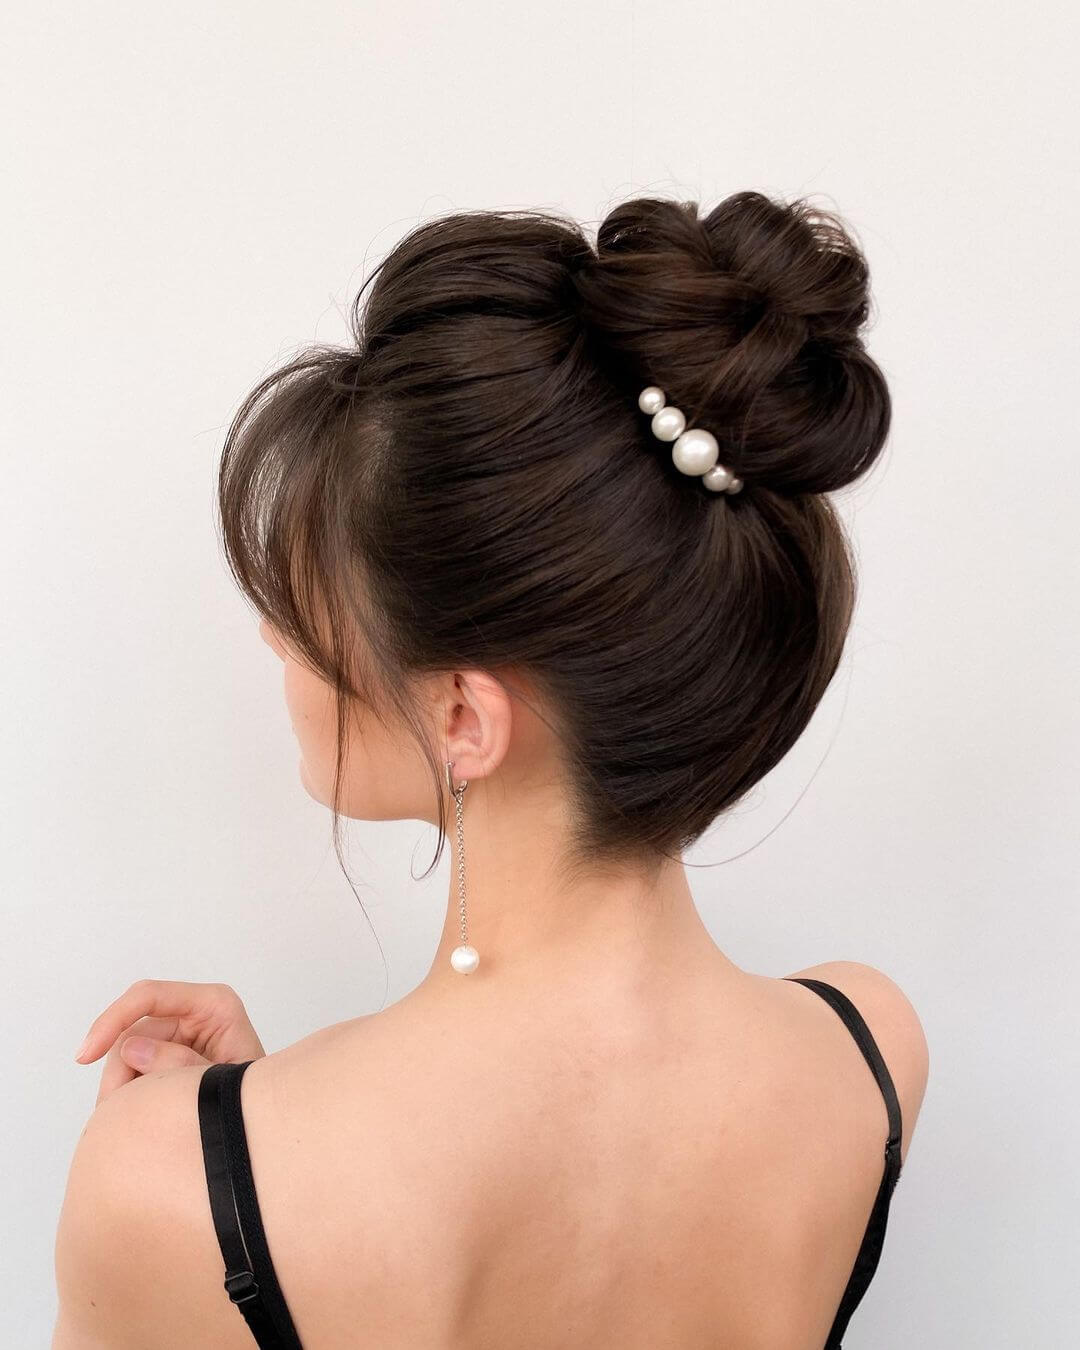 HOW TO SIMPLE BUN PERFECT FOR PROM  WEDDINGS  Alex Gaboury